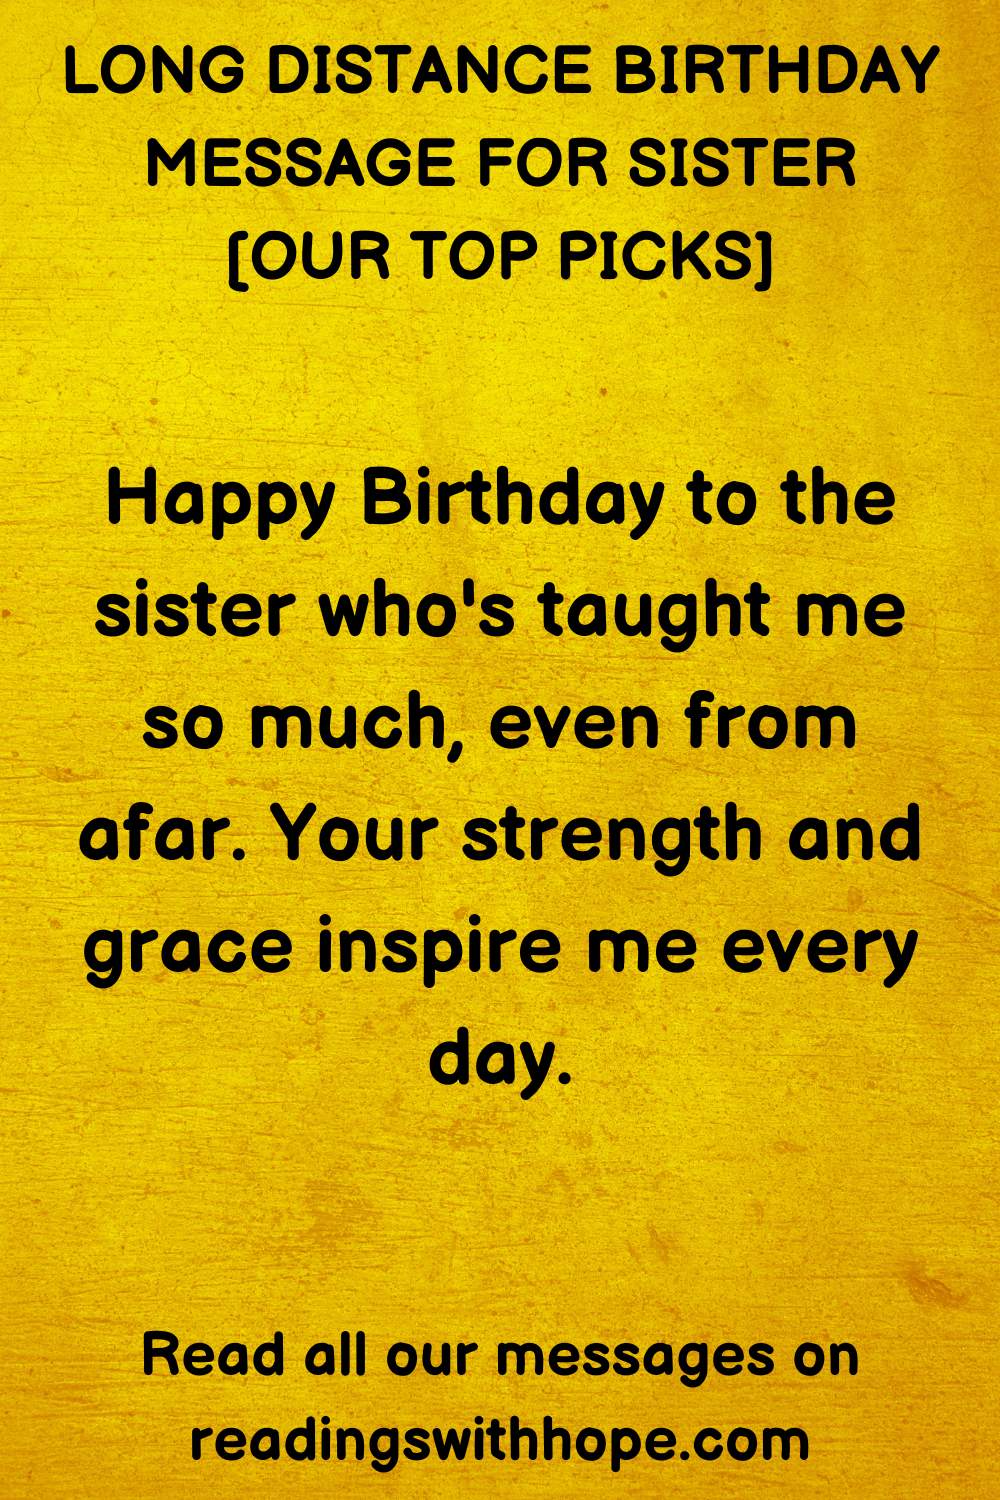 Long Distance Birthday Message for Sister 3